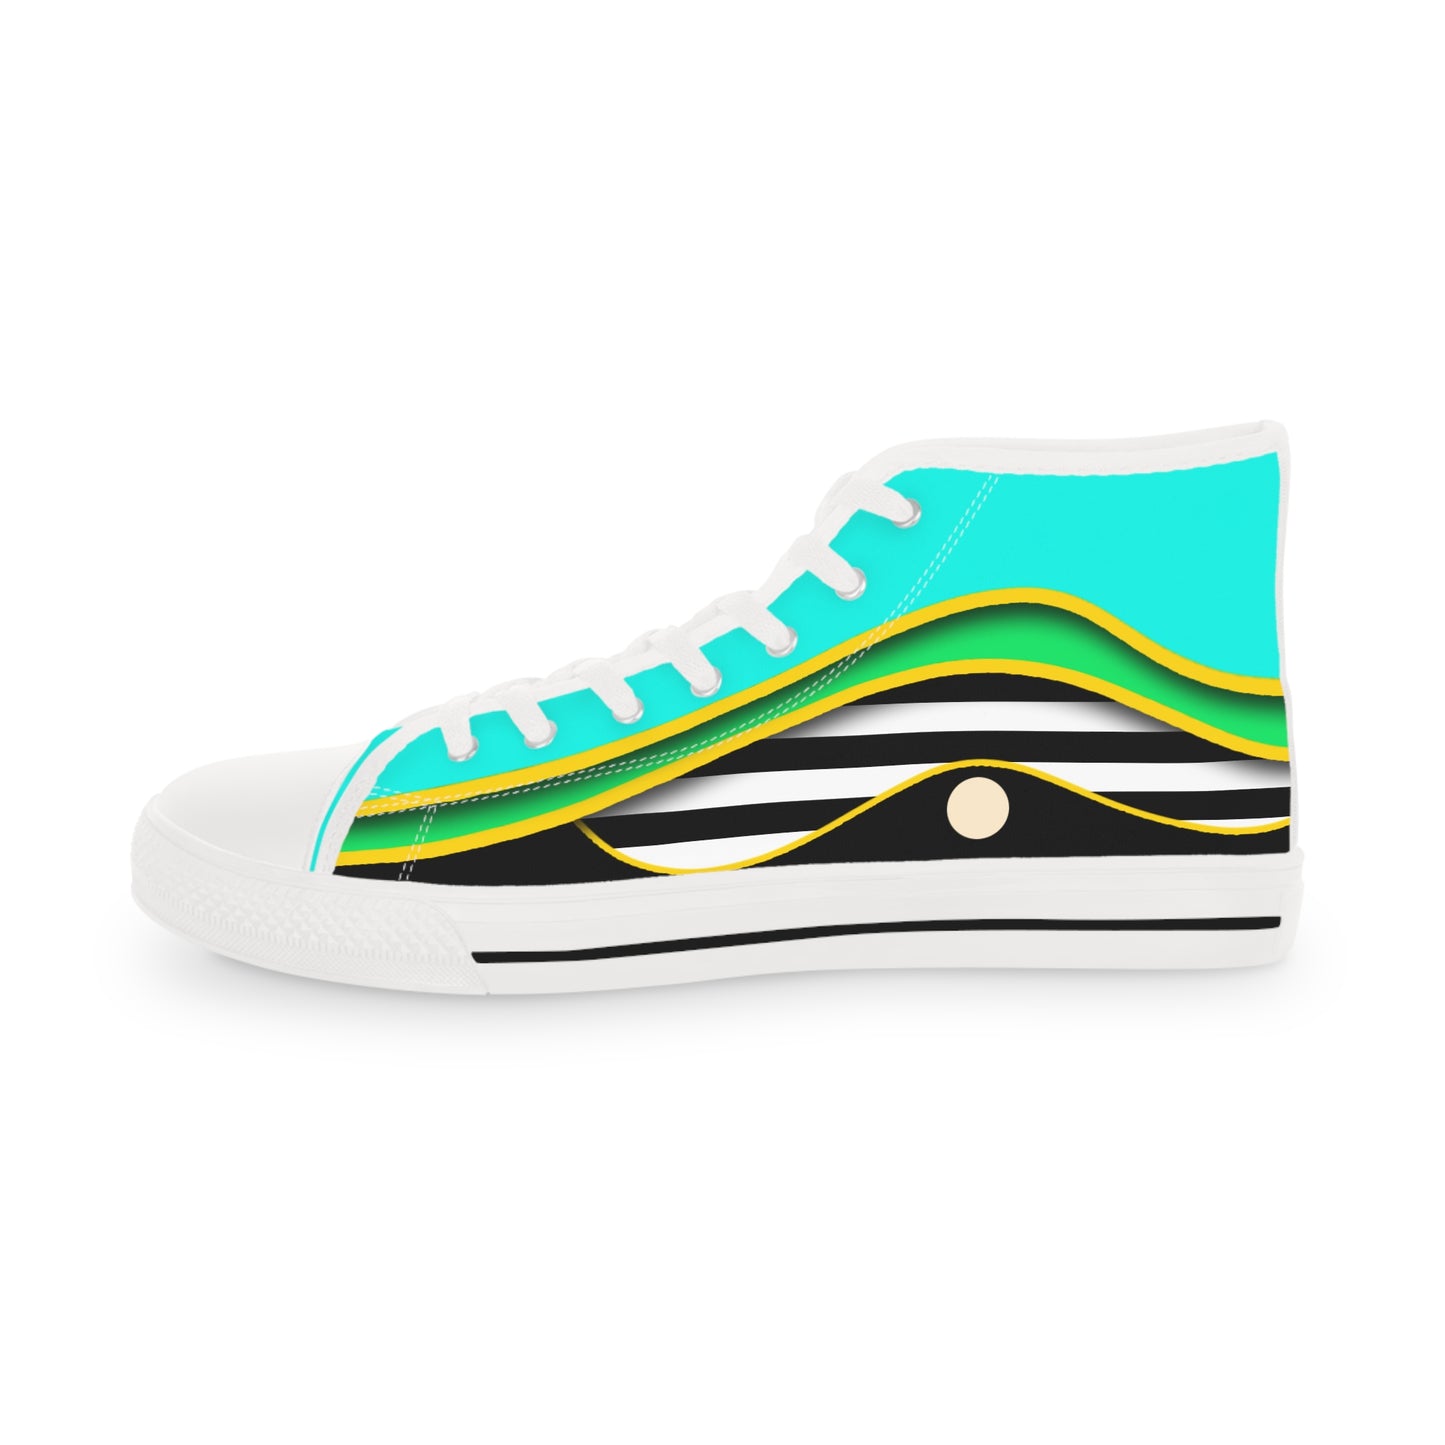 Men's High Top Graphics Sneakers - 10001 US 14 White sole